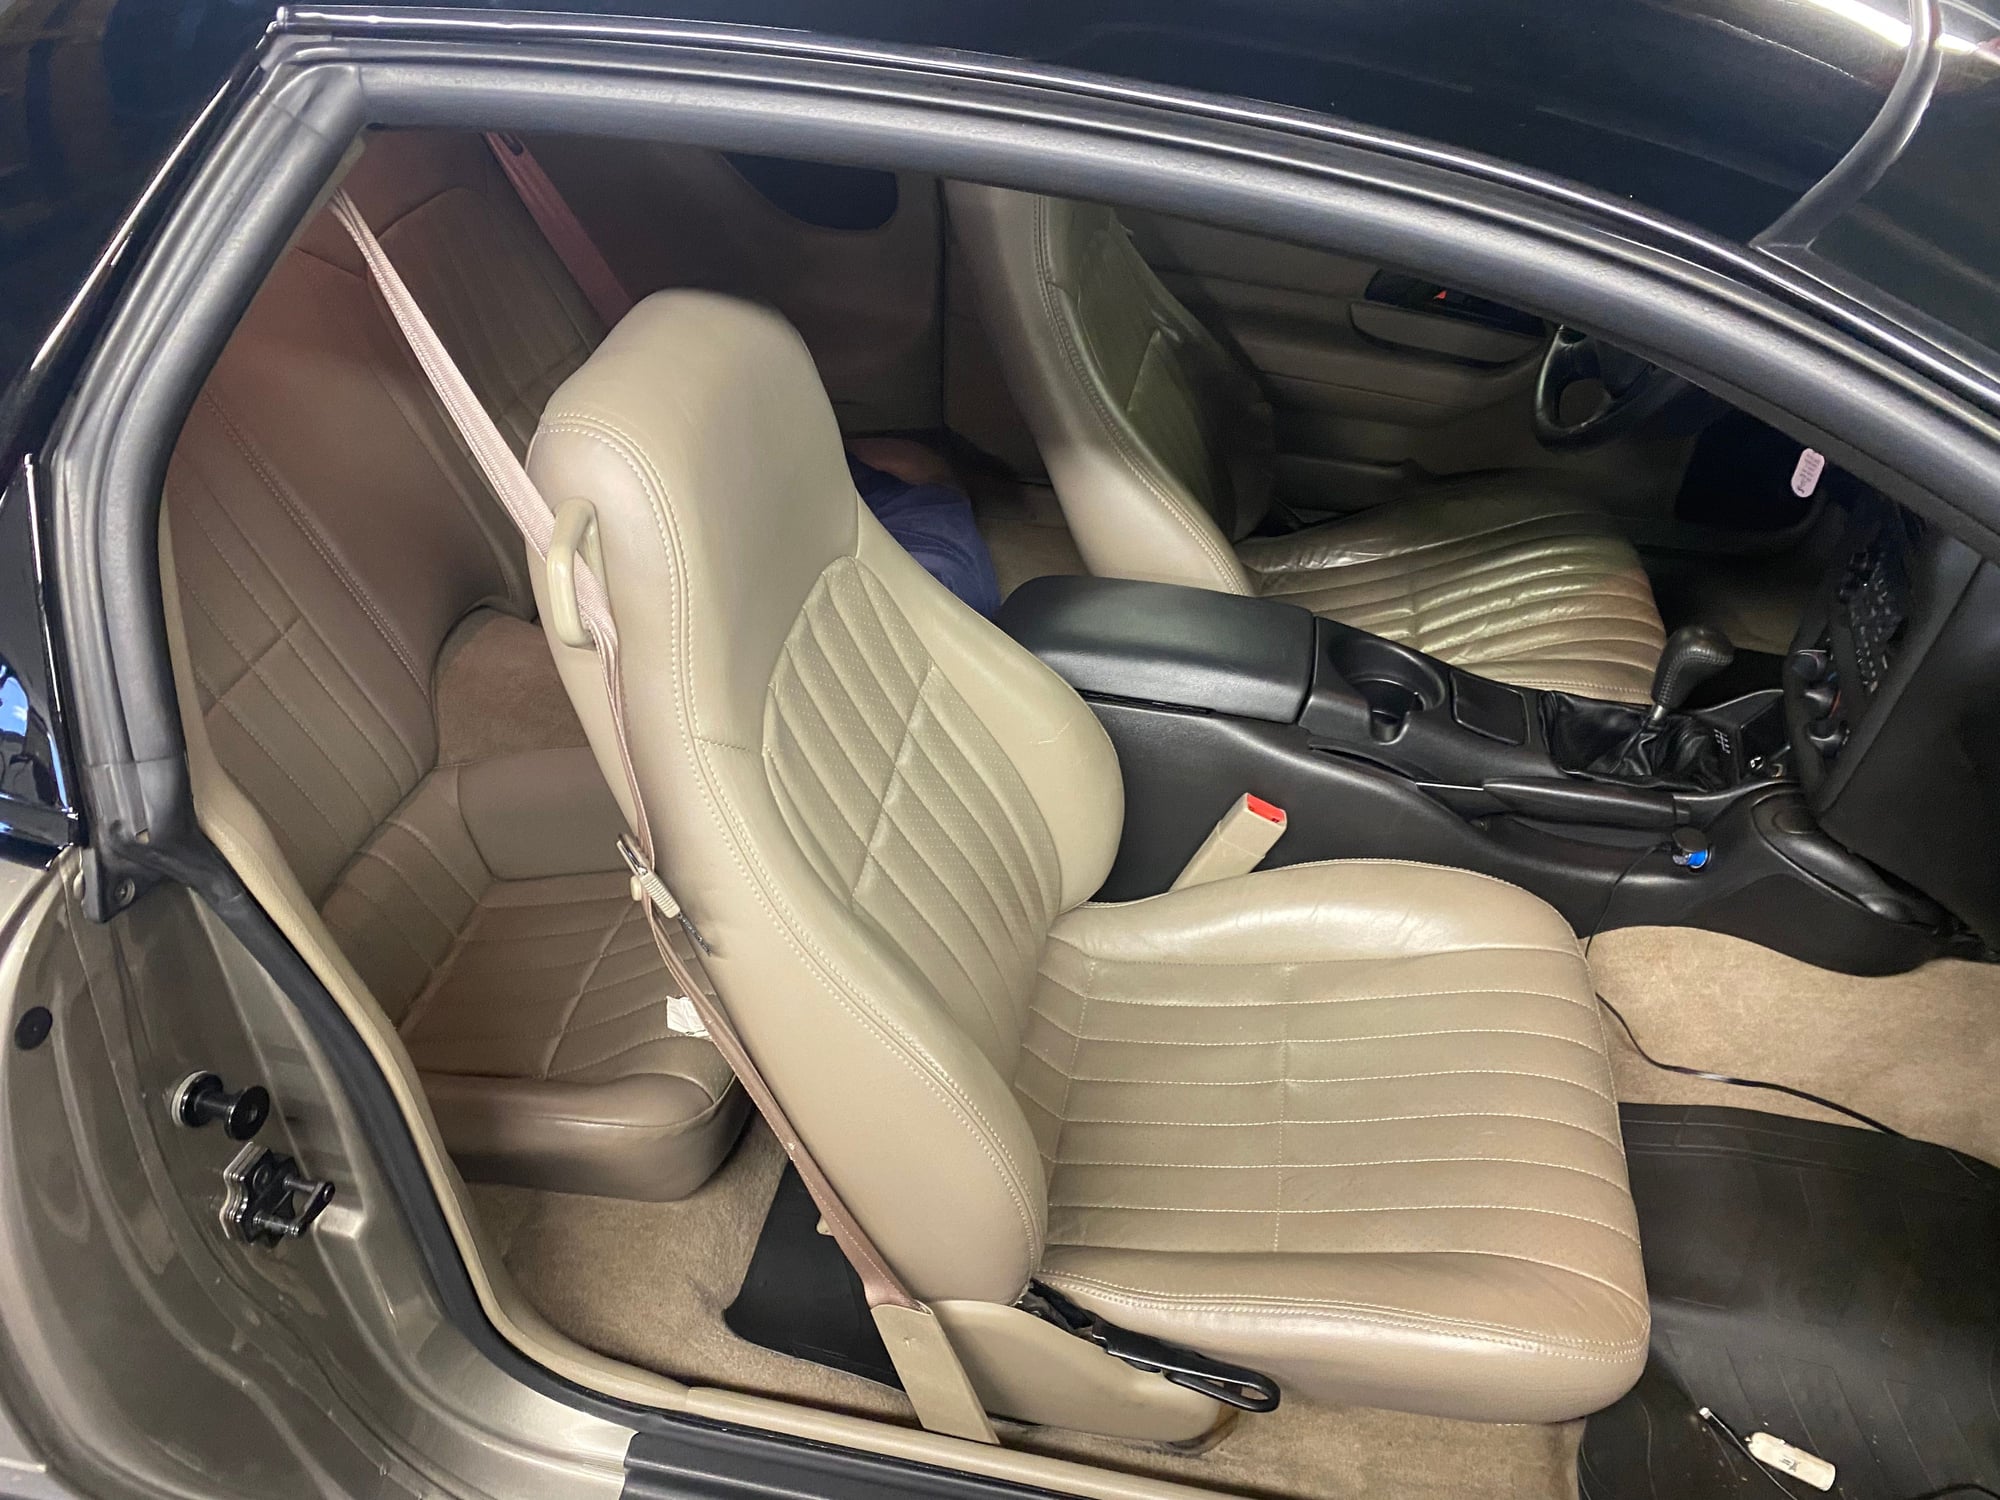 Interior/Upholstery - WTB complete ebony interior in Mint condition to swap out for my mint tan interior - Used - 2000 to 2002 Chevrolet Camaro - Pennsylvania, PA 18951, United States